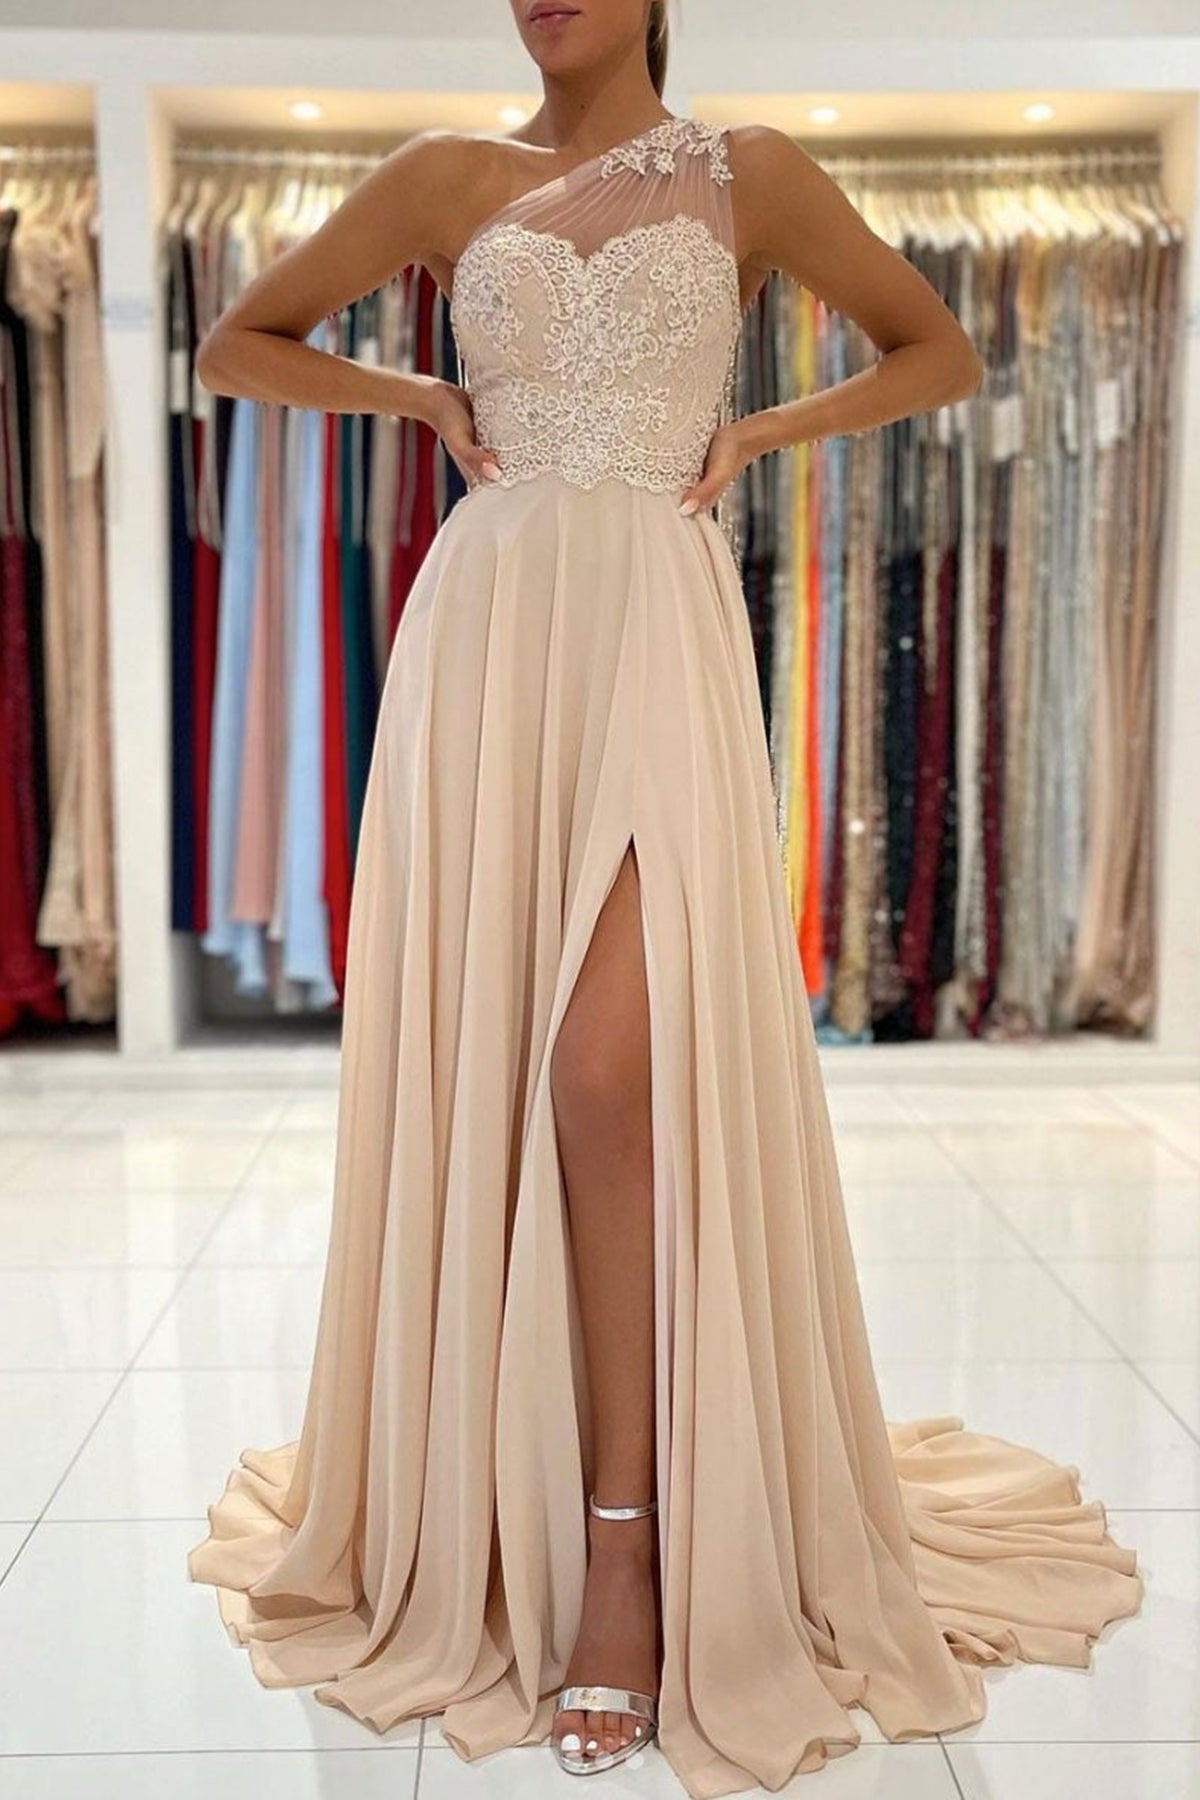 Champagne Chiffon One Shoulder Lace Long Prom Dresses with High Slit, One Shoulder Champagne Formal Dresses, Champagne Lace Evening Dresses